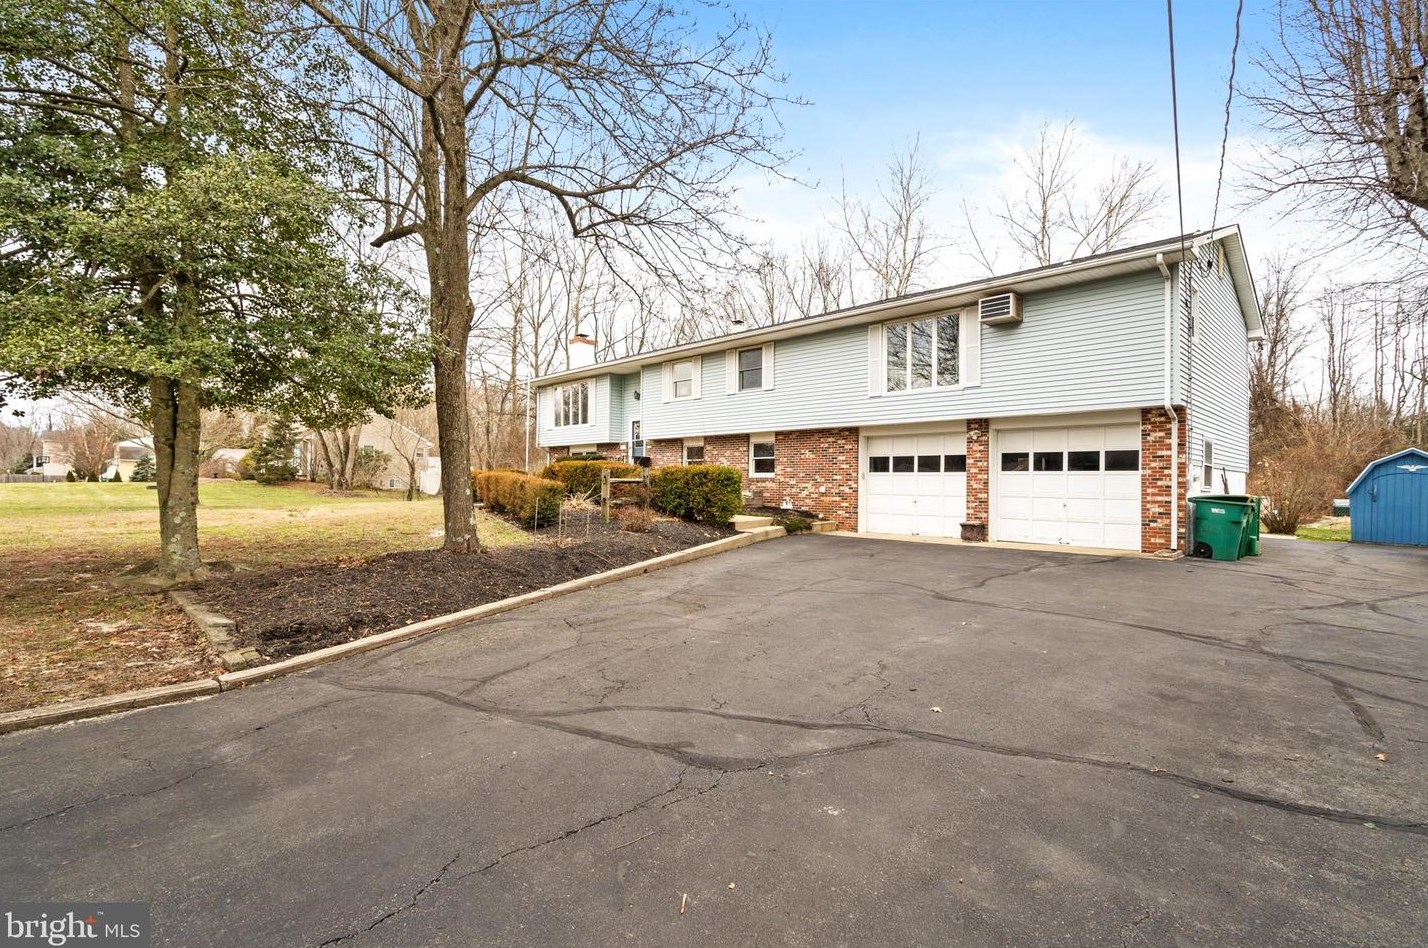 35 Bright Rd, Plumsted Township, NJ 08533